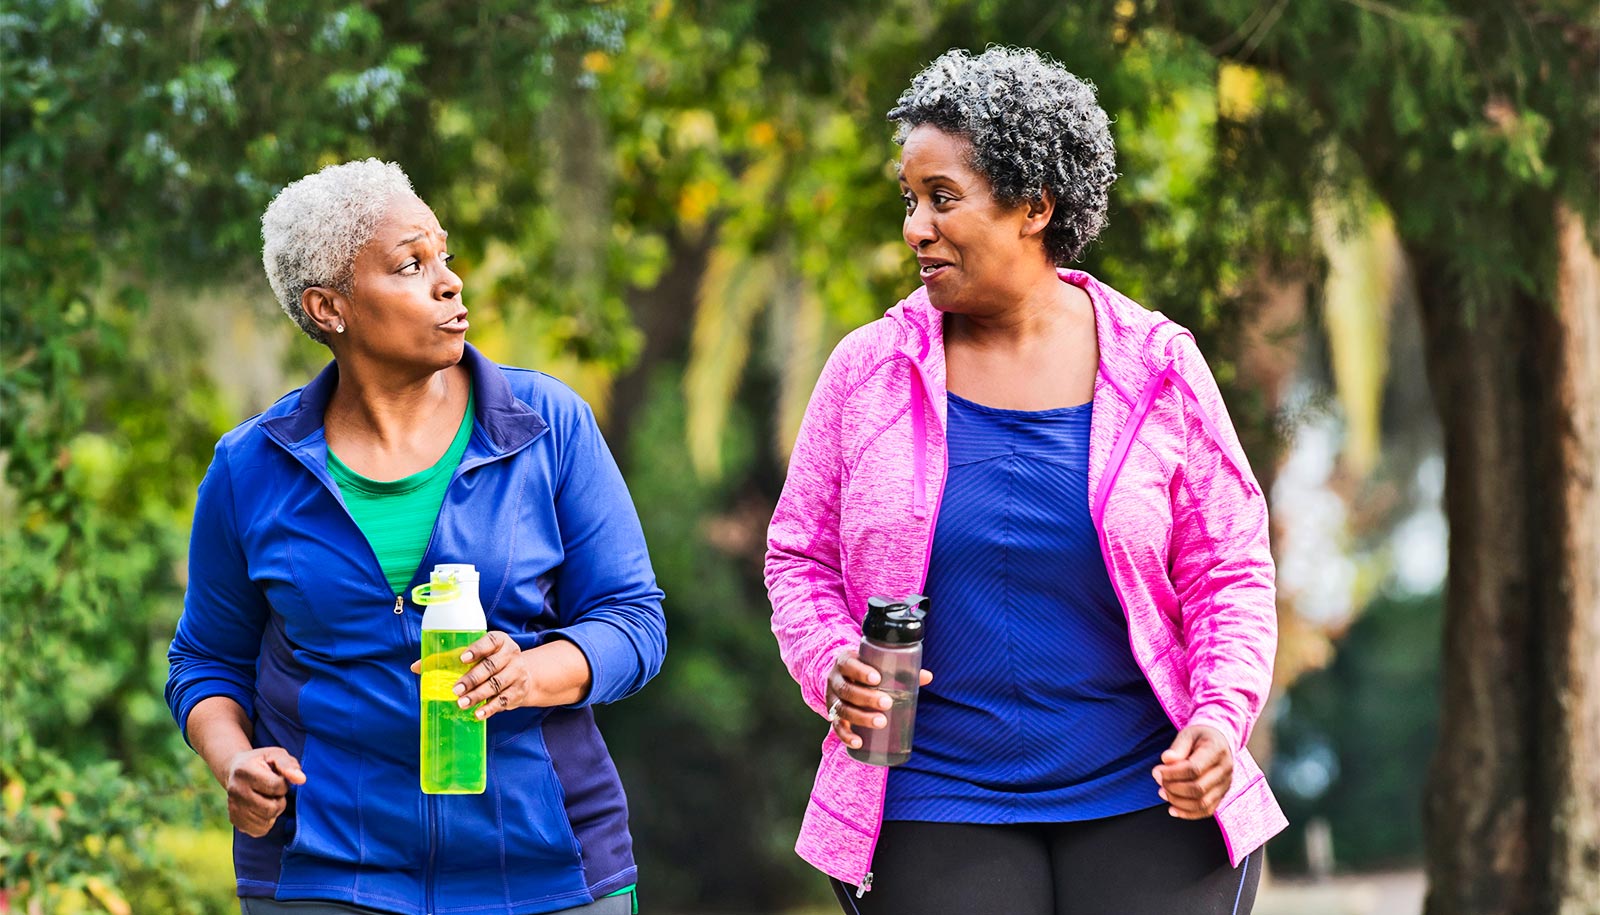 Exercise and socializing keep aging brains healthy - Futurity